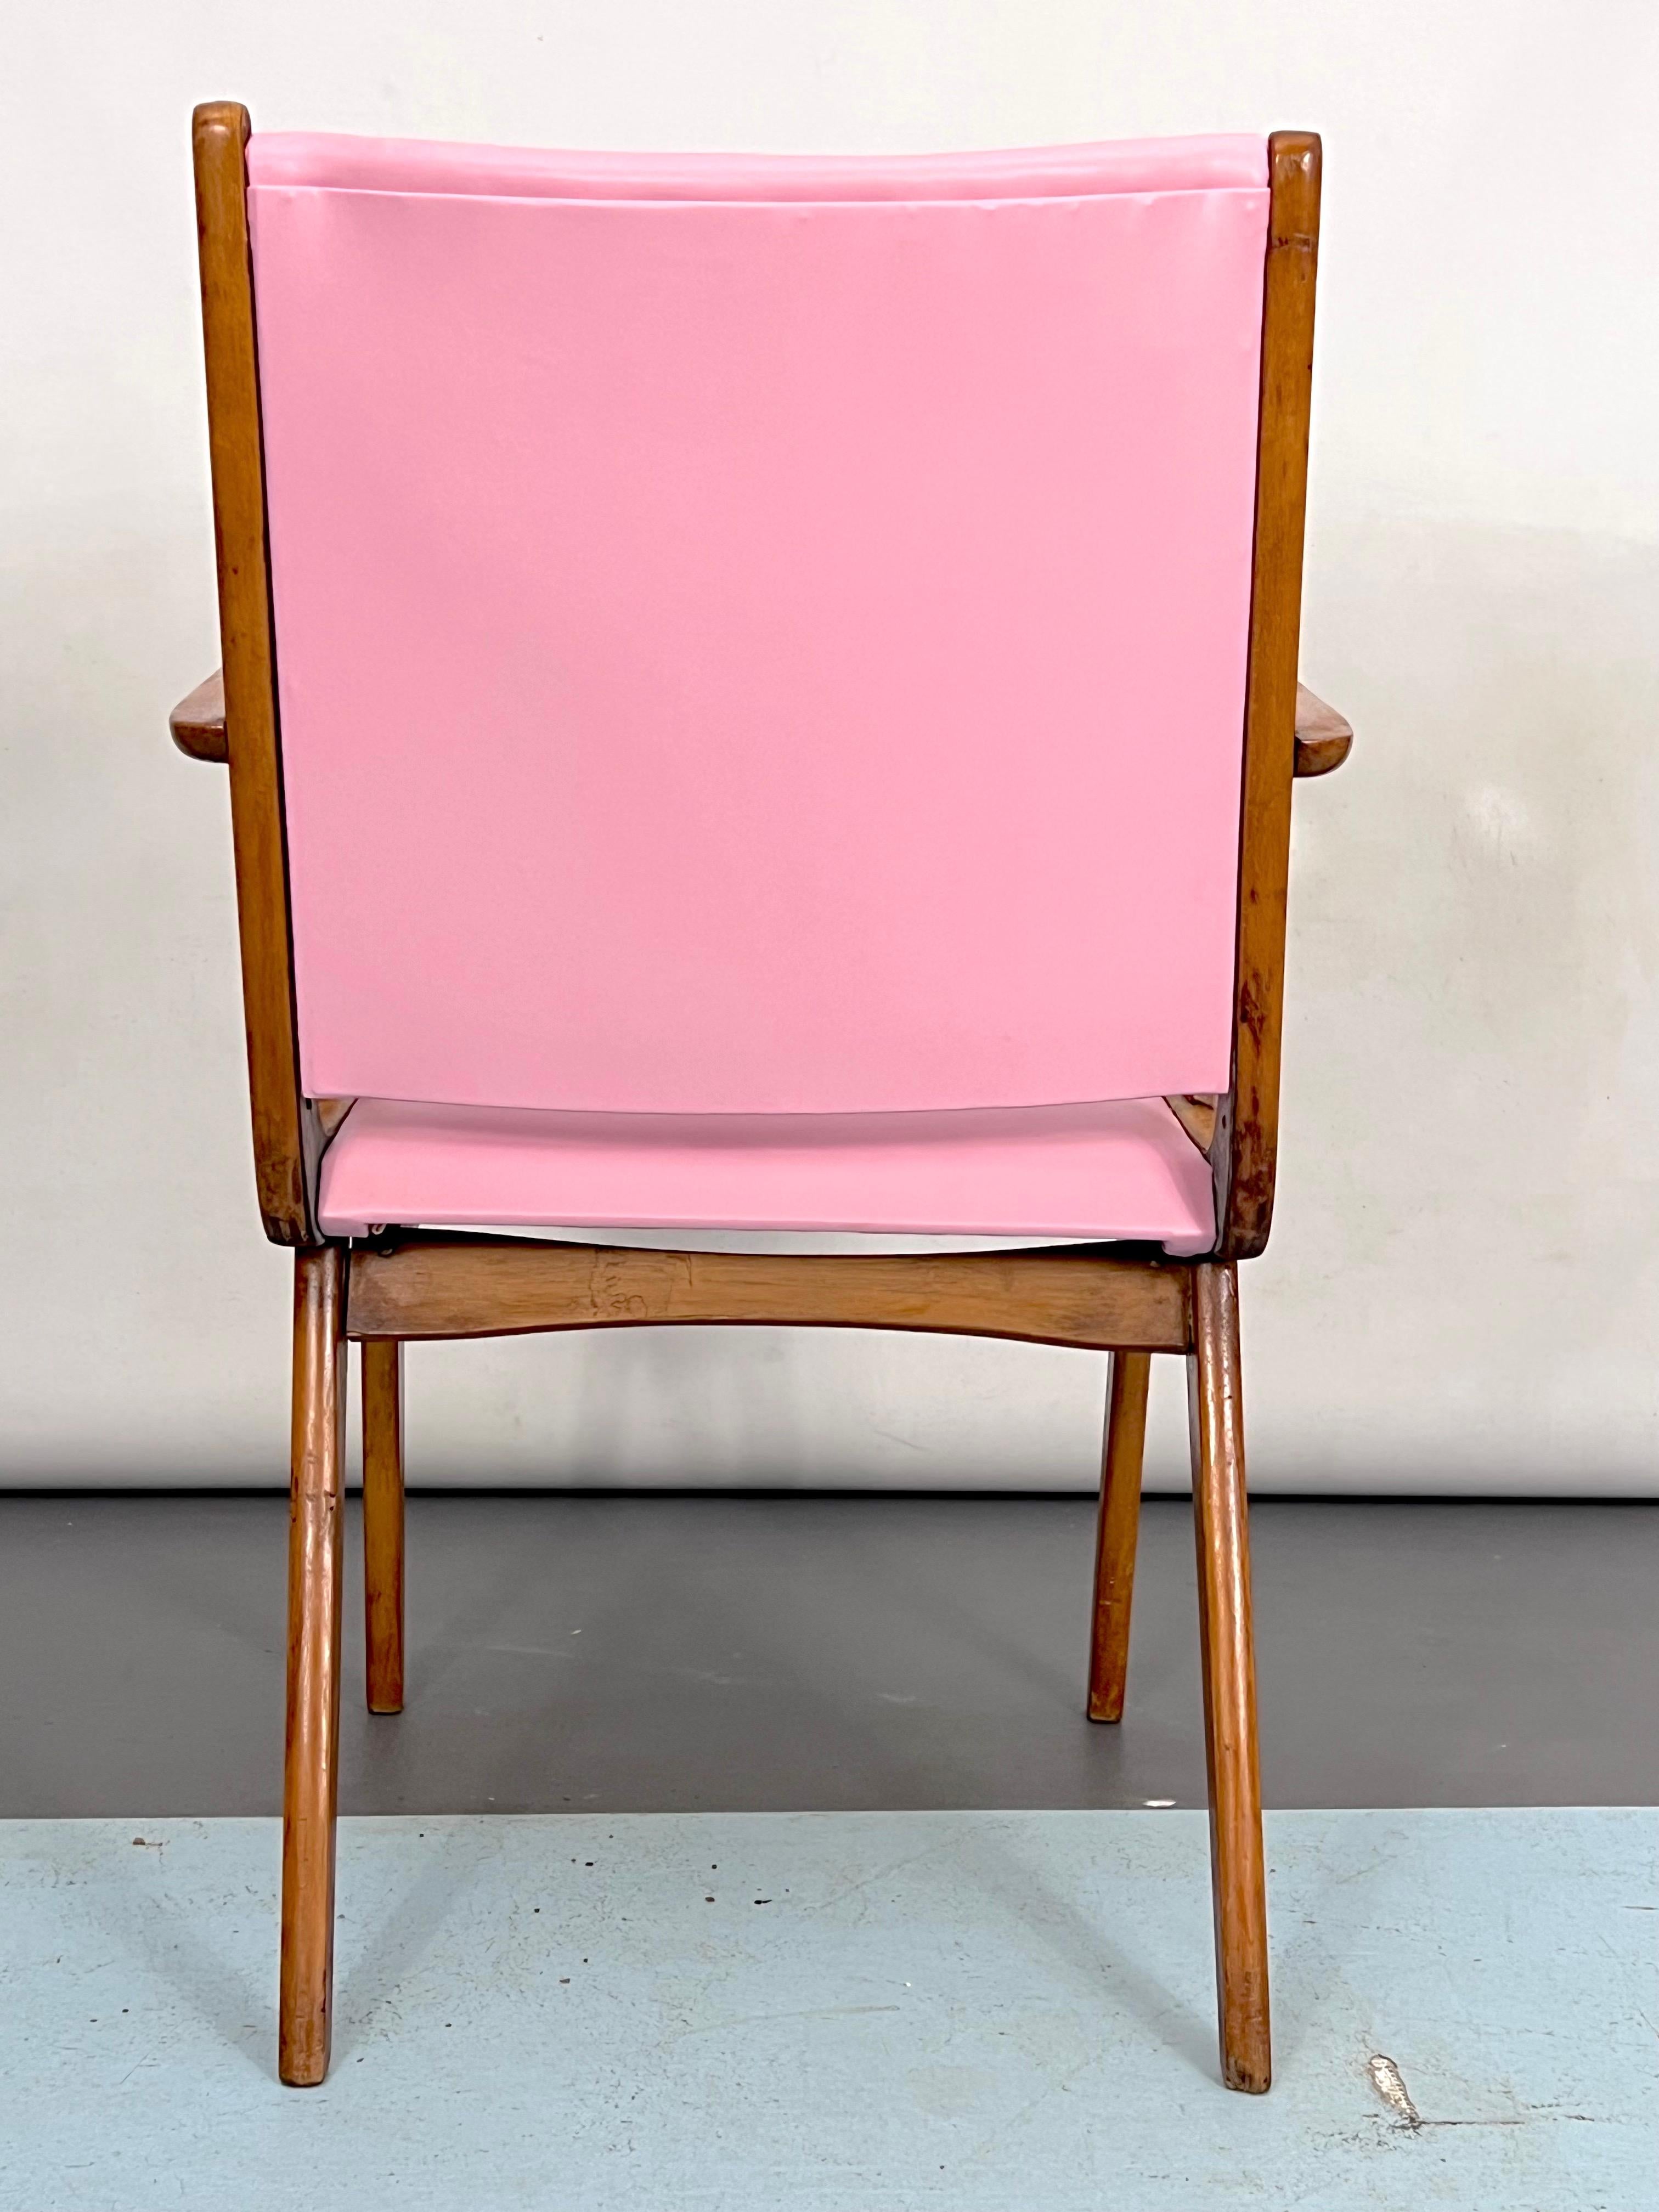 20th Century Vintage Italian Wood Accent Chair in Pink Leatherette, Italy, 1950s For Sale